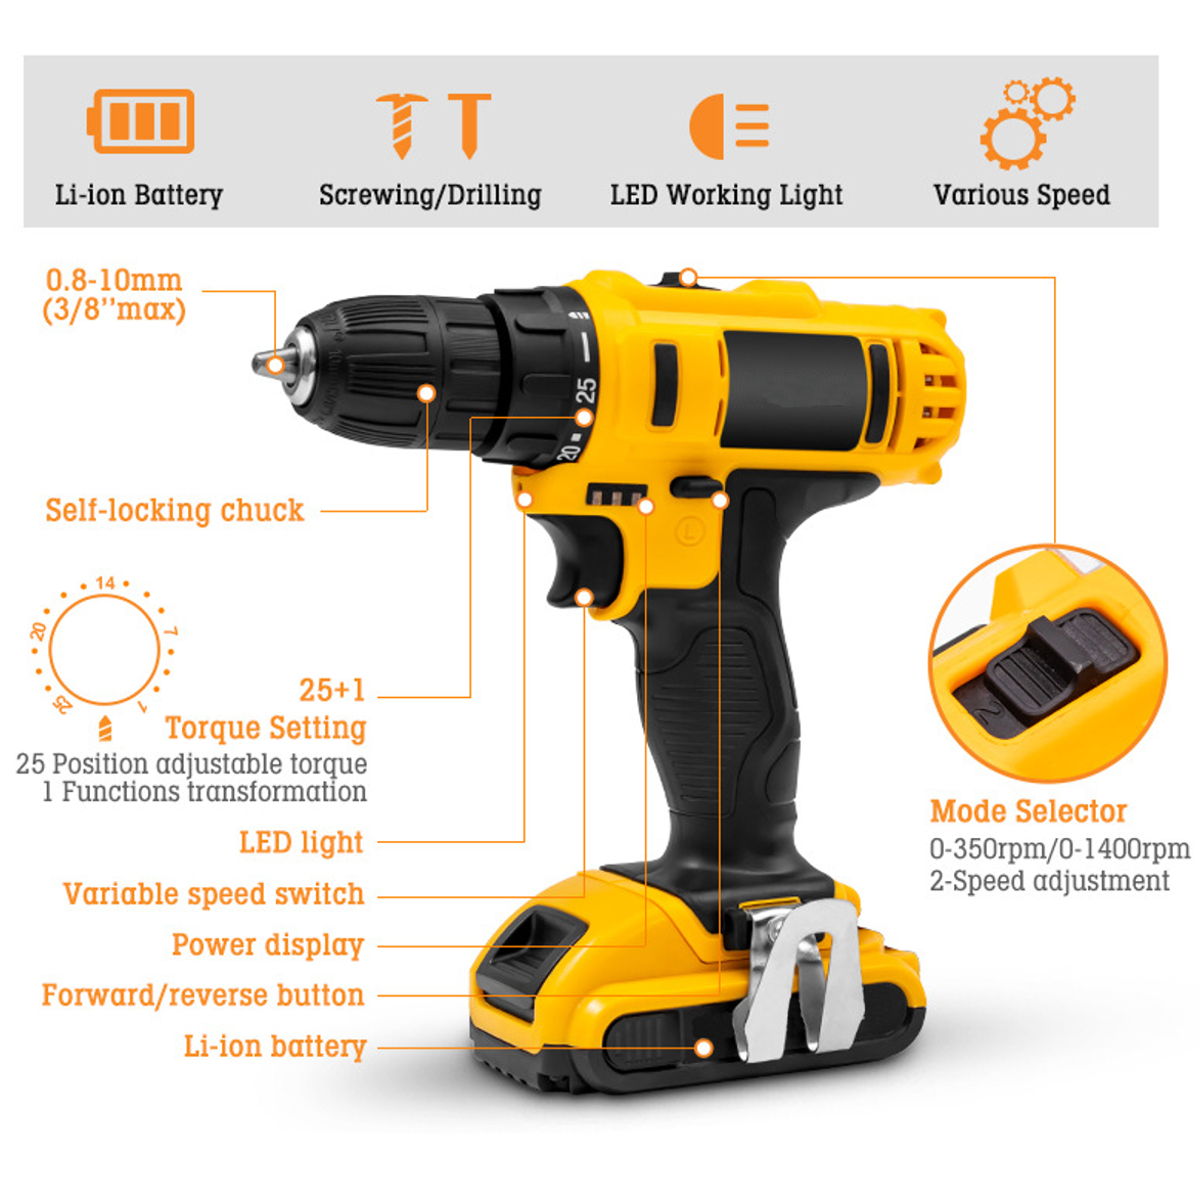 21V-520Nm-Electric-Drill-Cordless-Rechargeable-Screwdriver-Hammer-Drill-Set-w-Battery-1855055-3